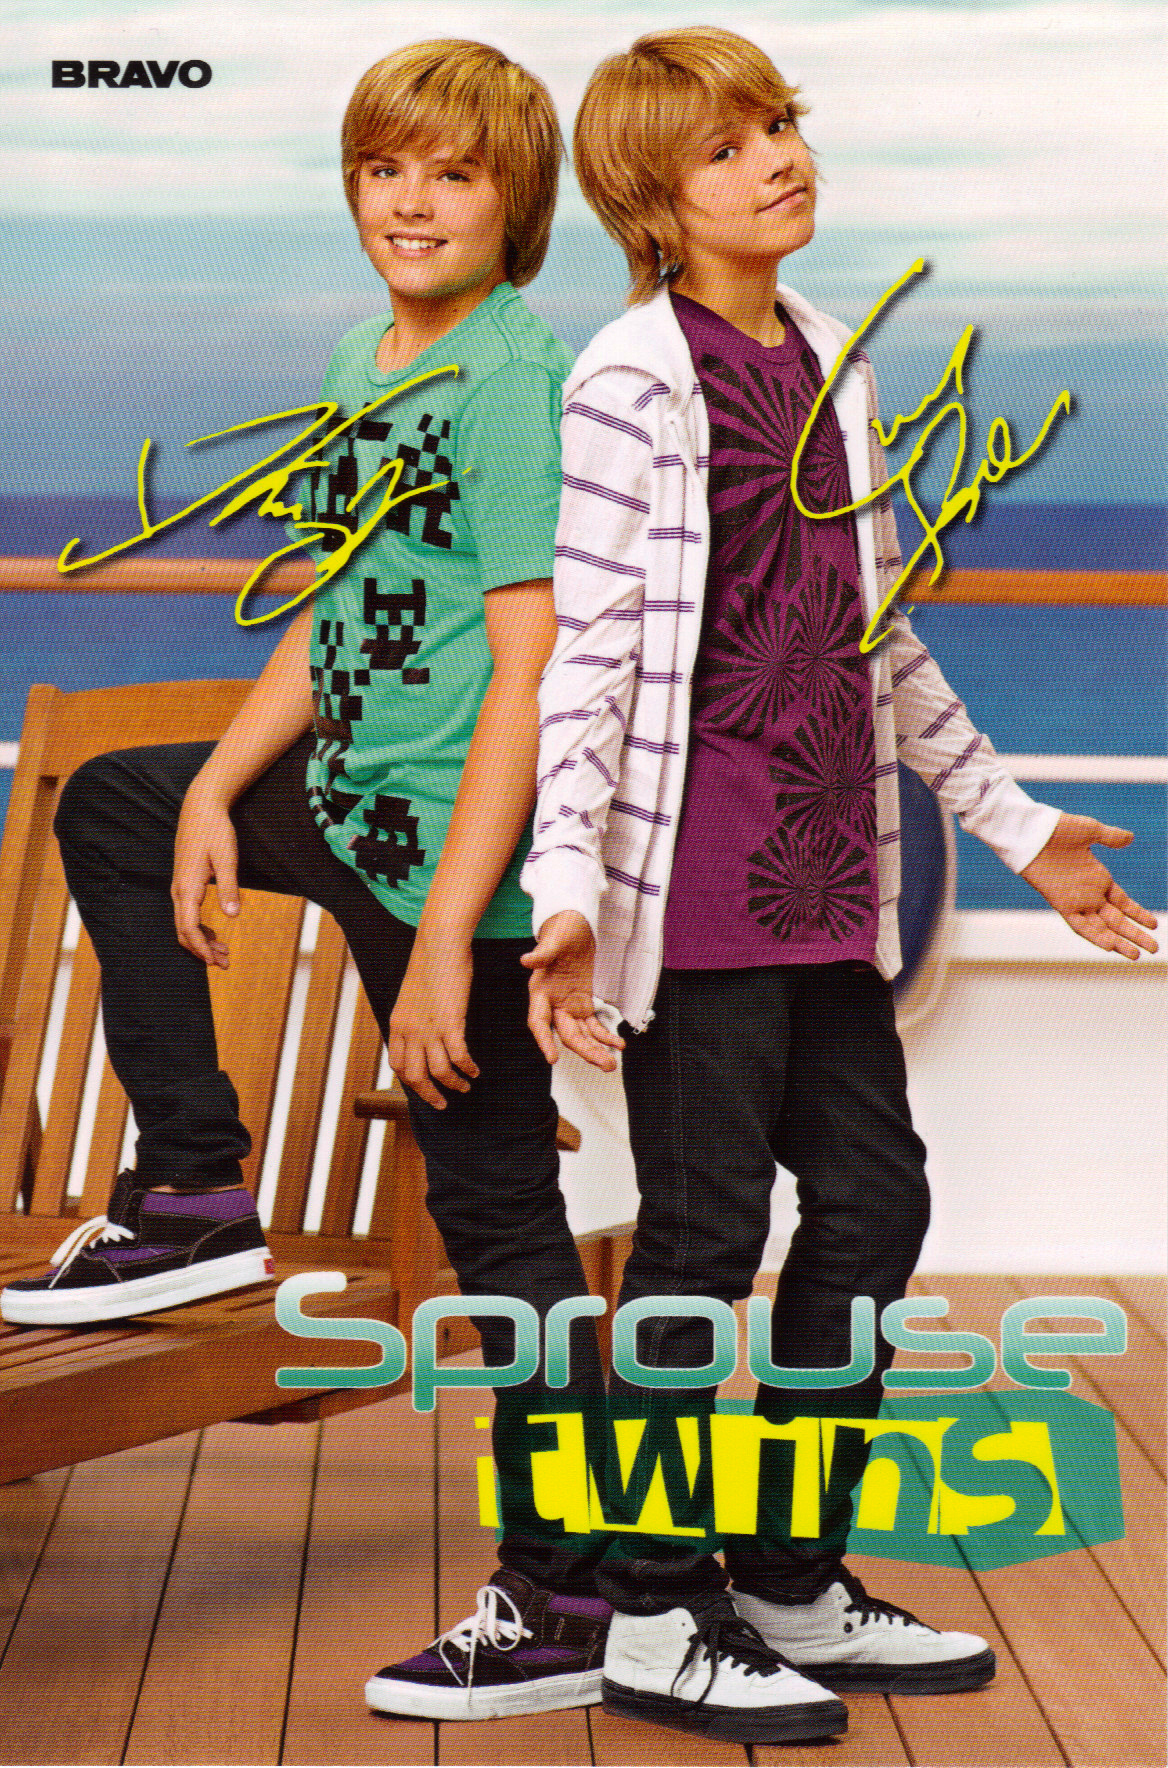 Sprouse Twins (a photocard with autographs of the german magazine "Bravo")